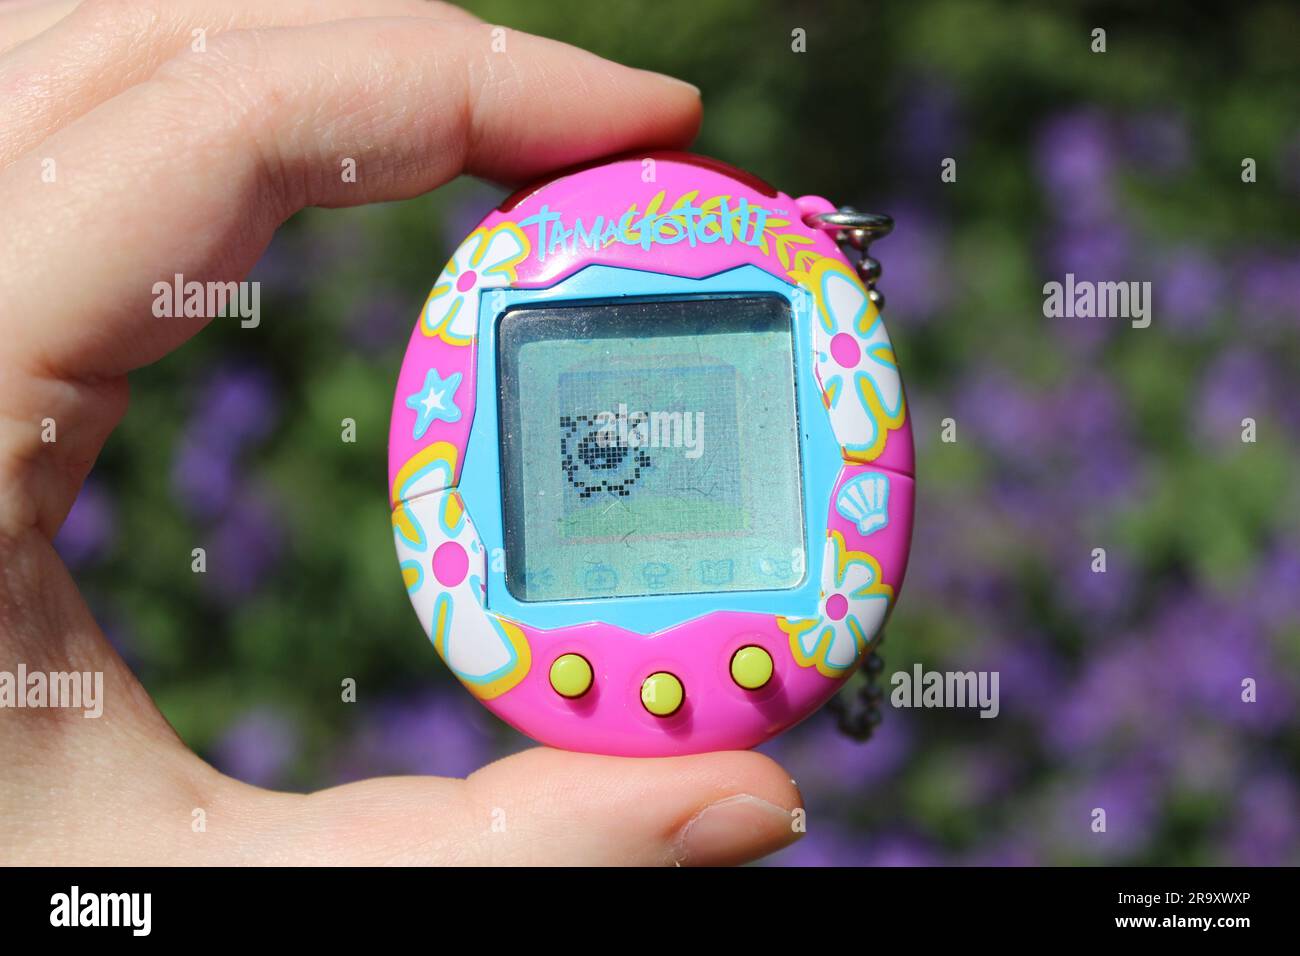 Photo depicting a tamagotchi device, pink with tropical flowers, held in someone's hand. Stock Photo